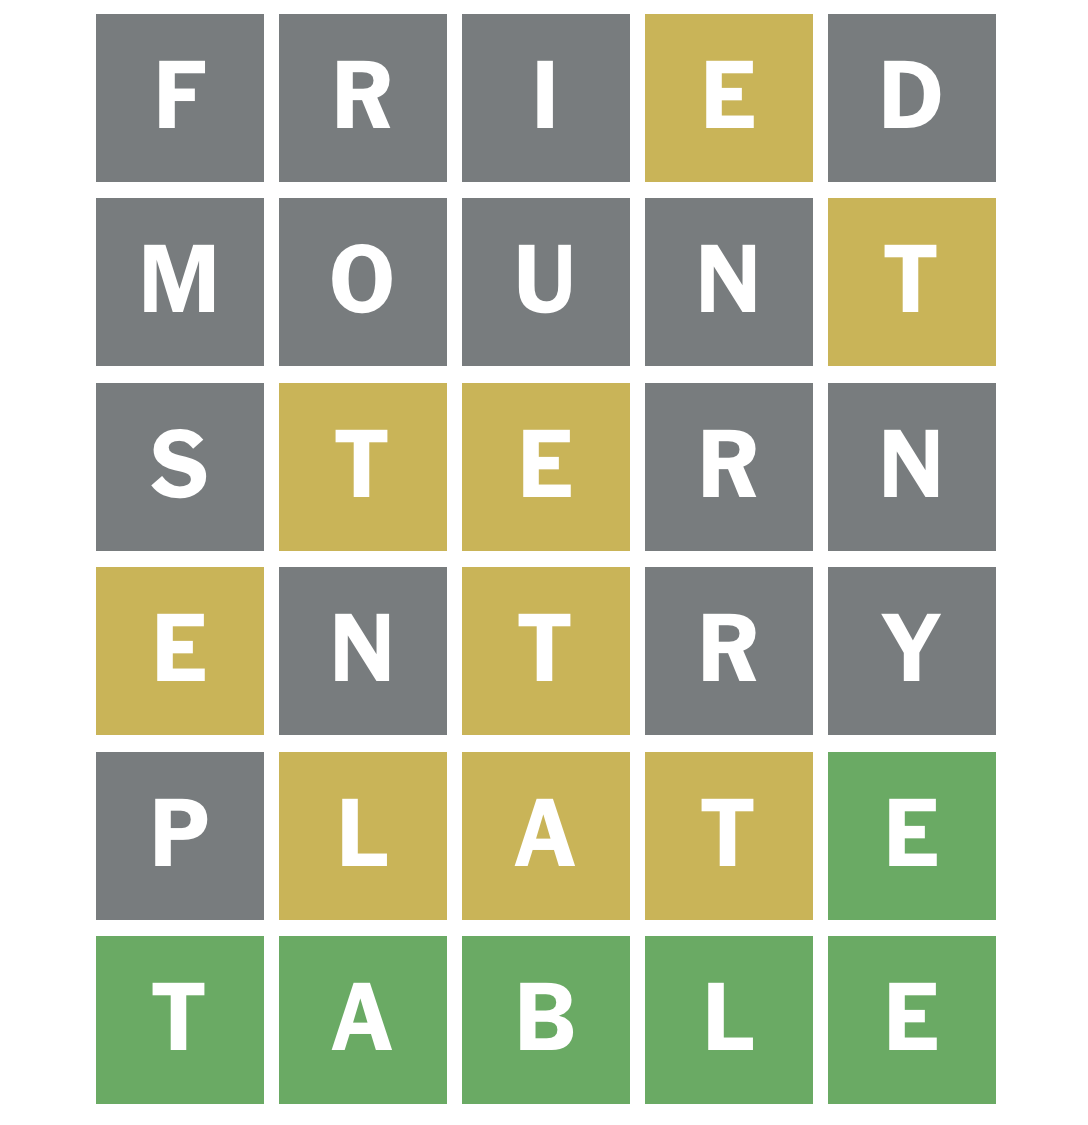 A wordl screenshot with the words: fried, mount, stern, entry, plate, table